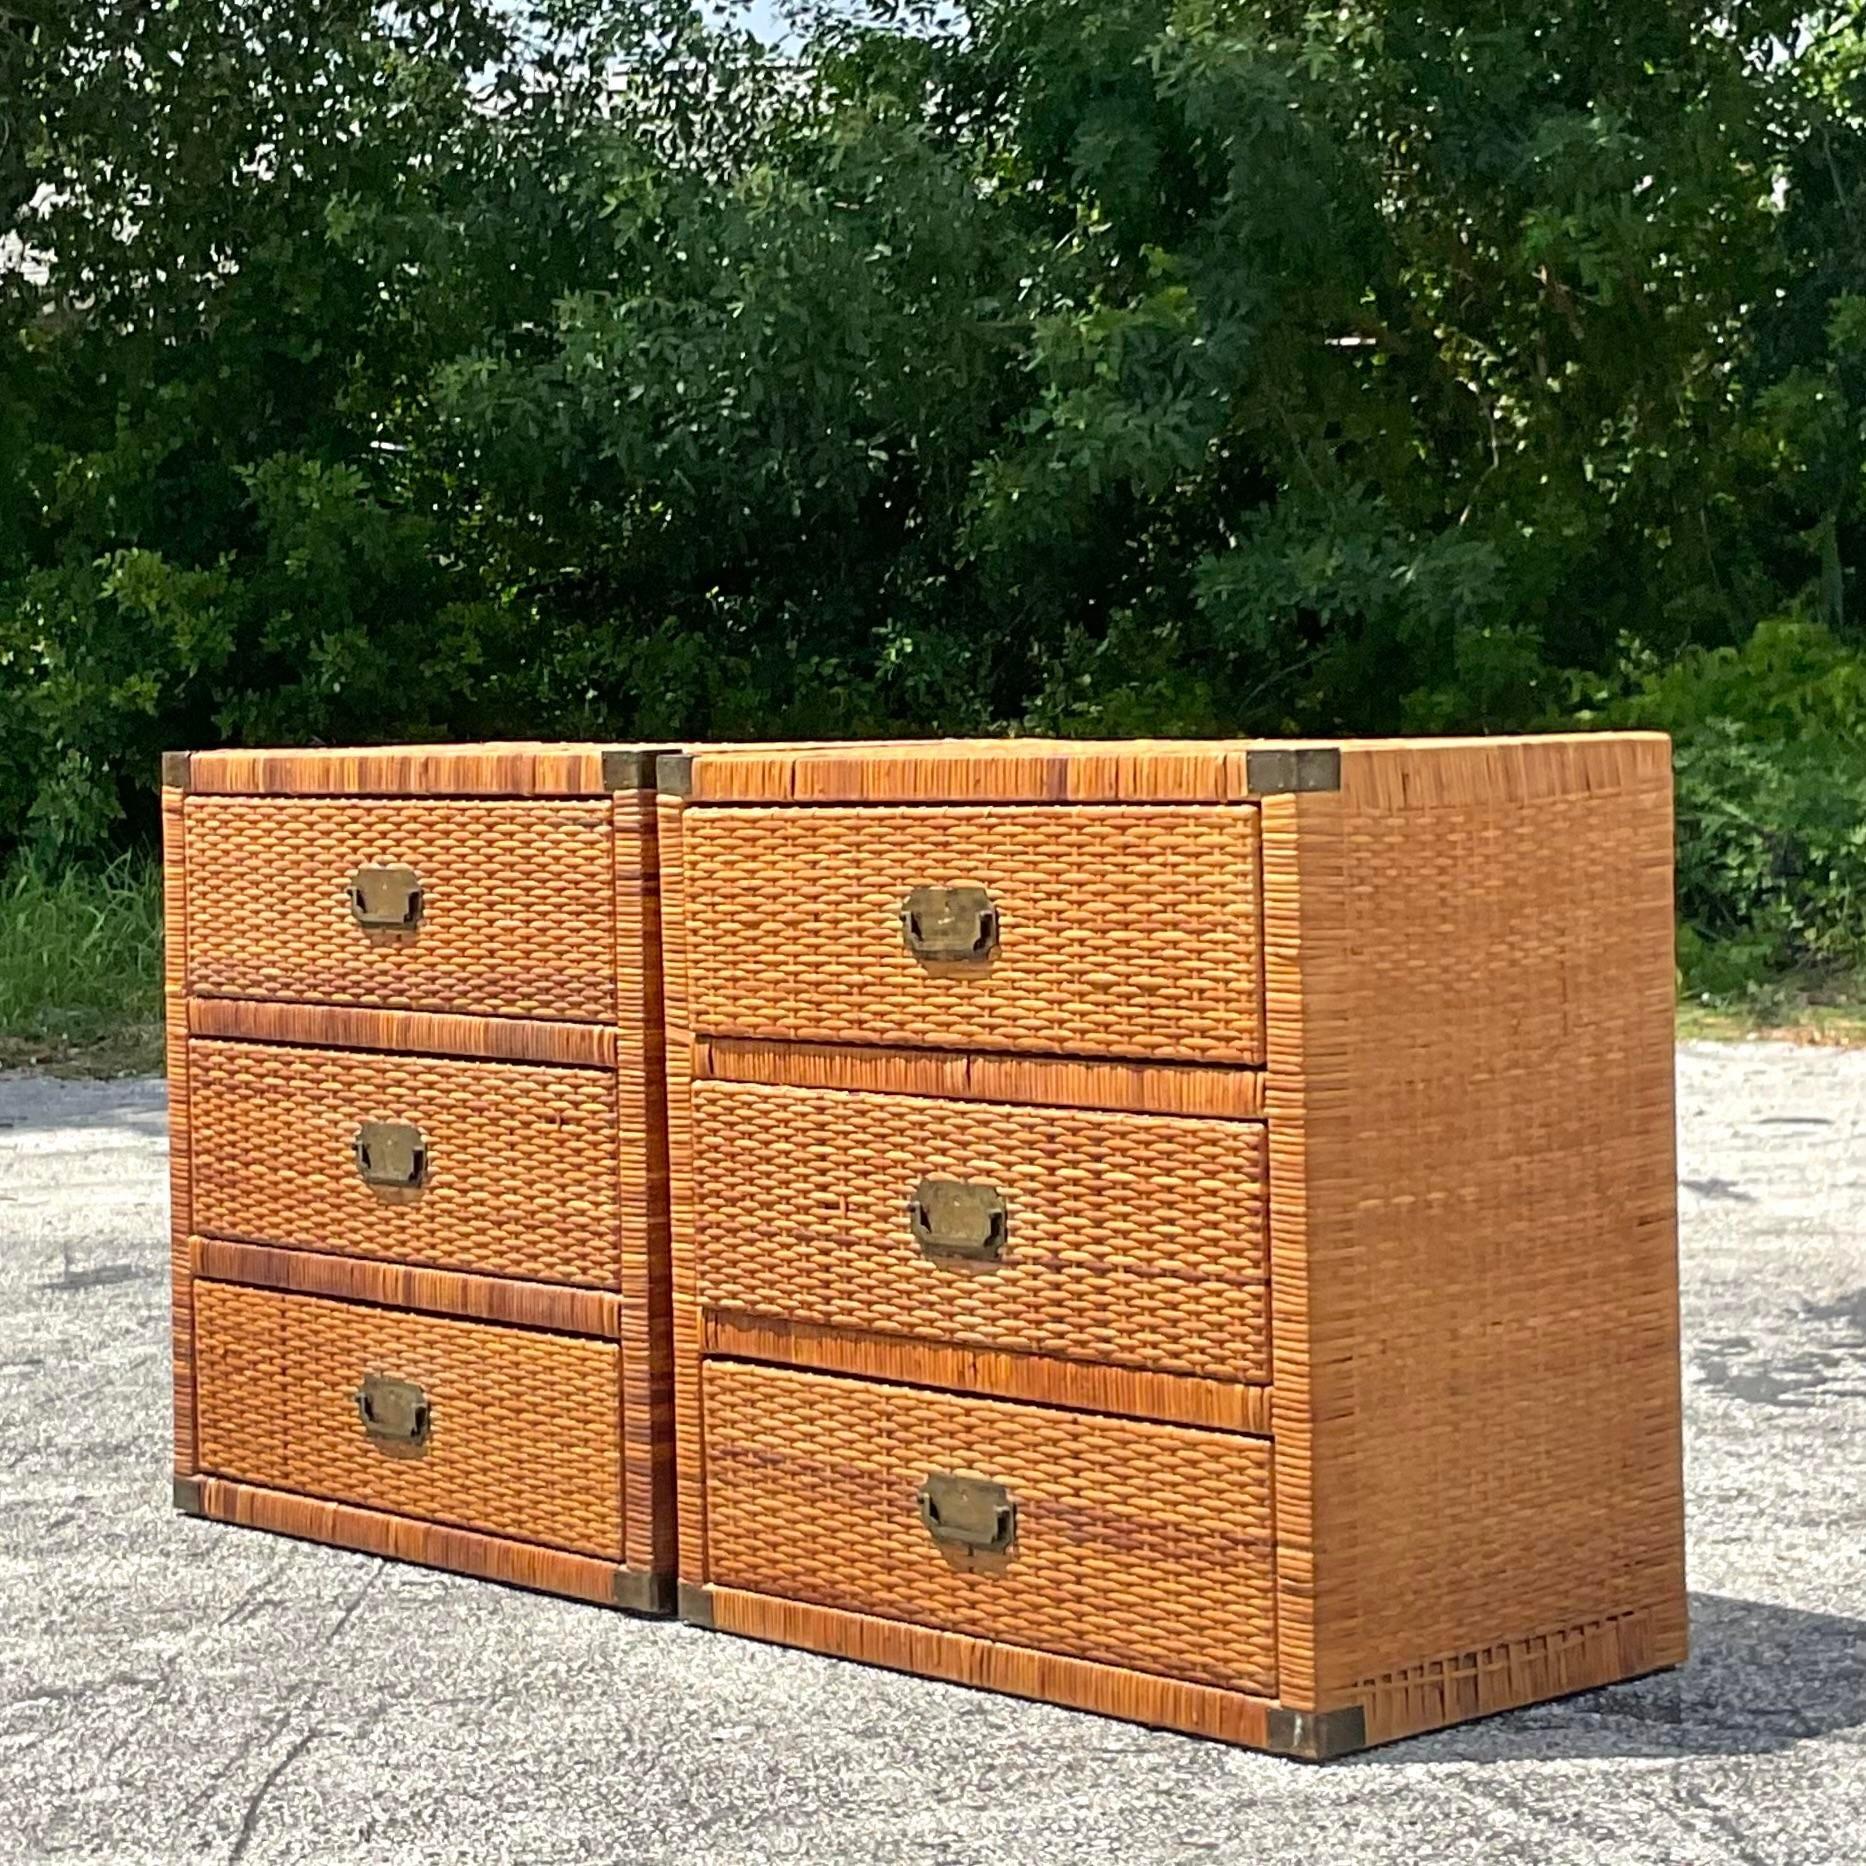 A fabulous pair of vintage Coastal chest of drawers. A chic woven rattan with brass campaign hardware. Perfect as chests, nightstands or push together for a dresser. You decide! Acquired from a Palm Beach estate.